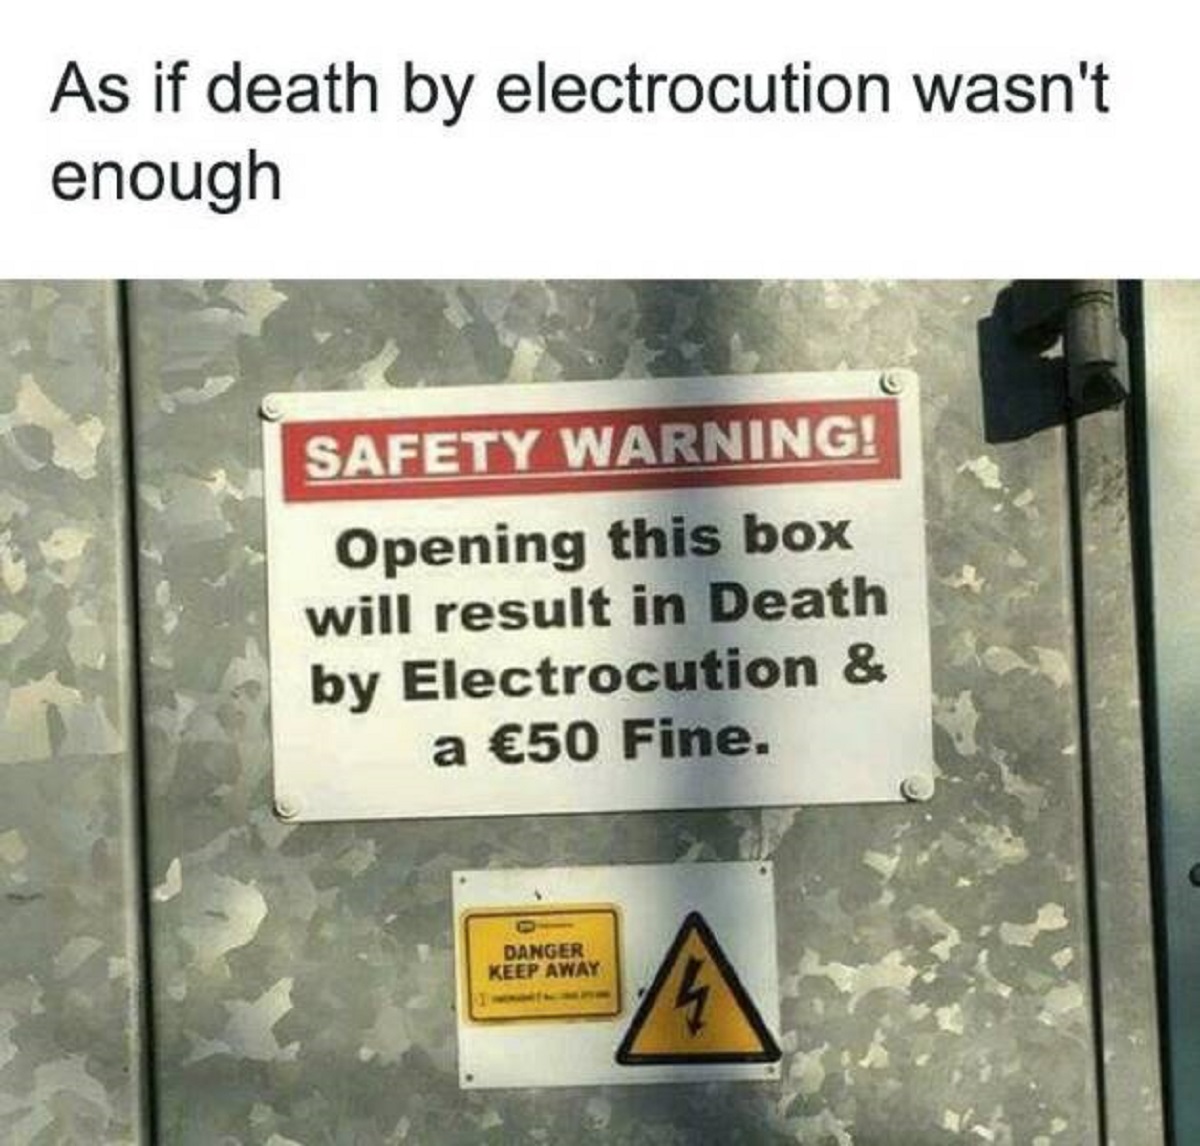 sign - As if death by electrocution wasn't enough Safety Warning! Opening this box will result in Death by Electrocution & a 50 Fine. Danger Keep Away